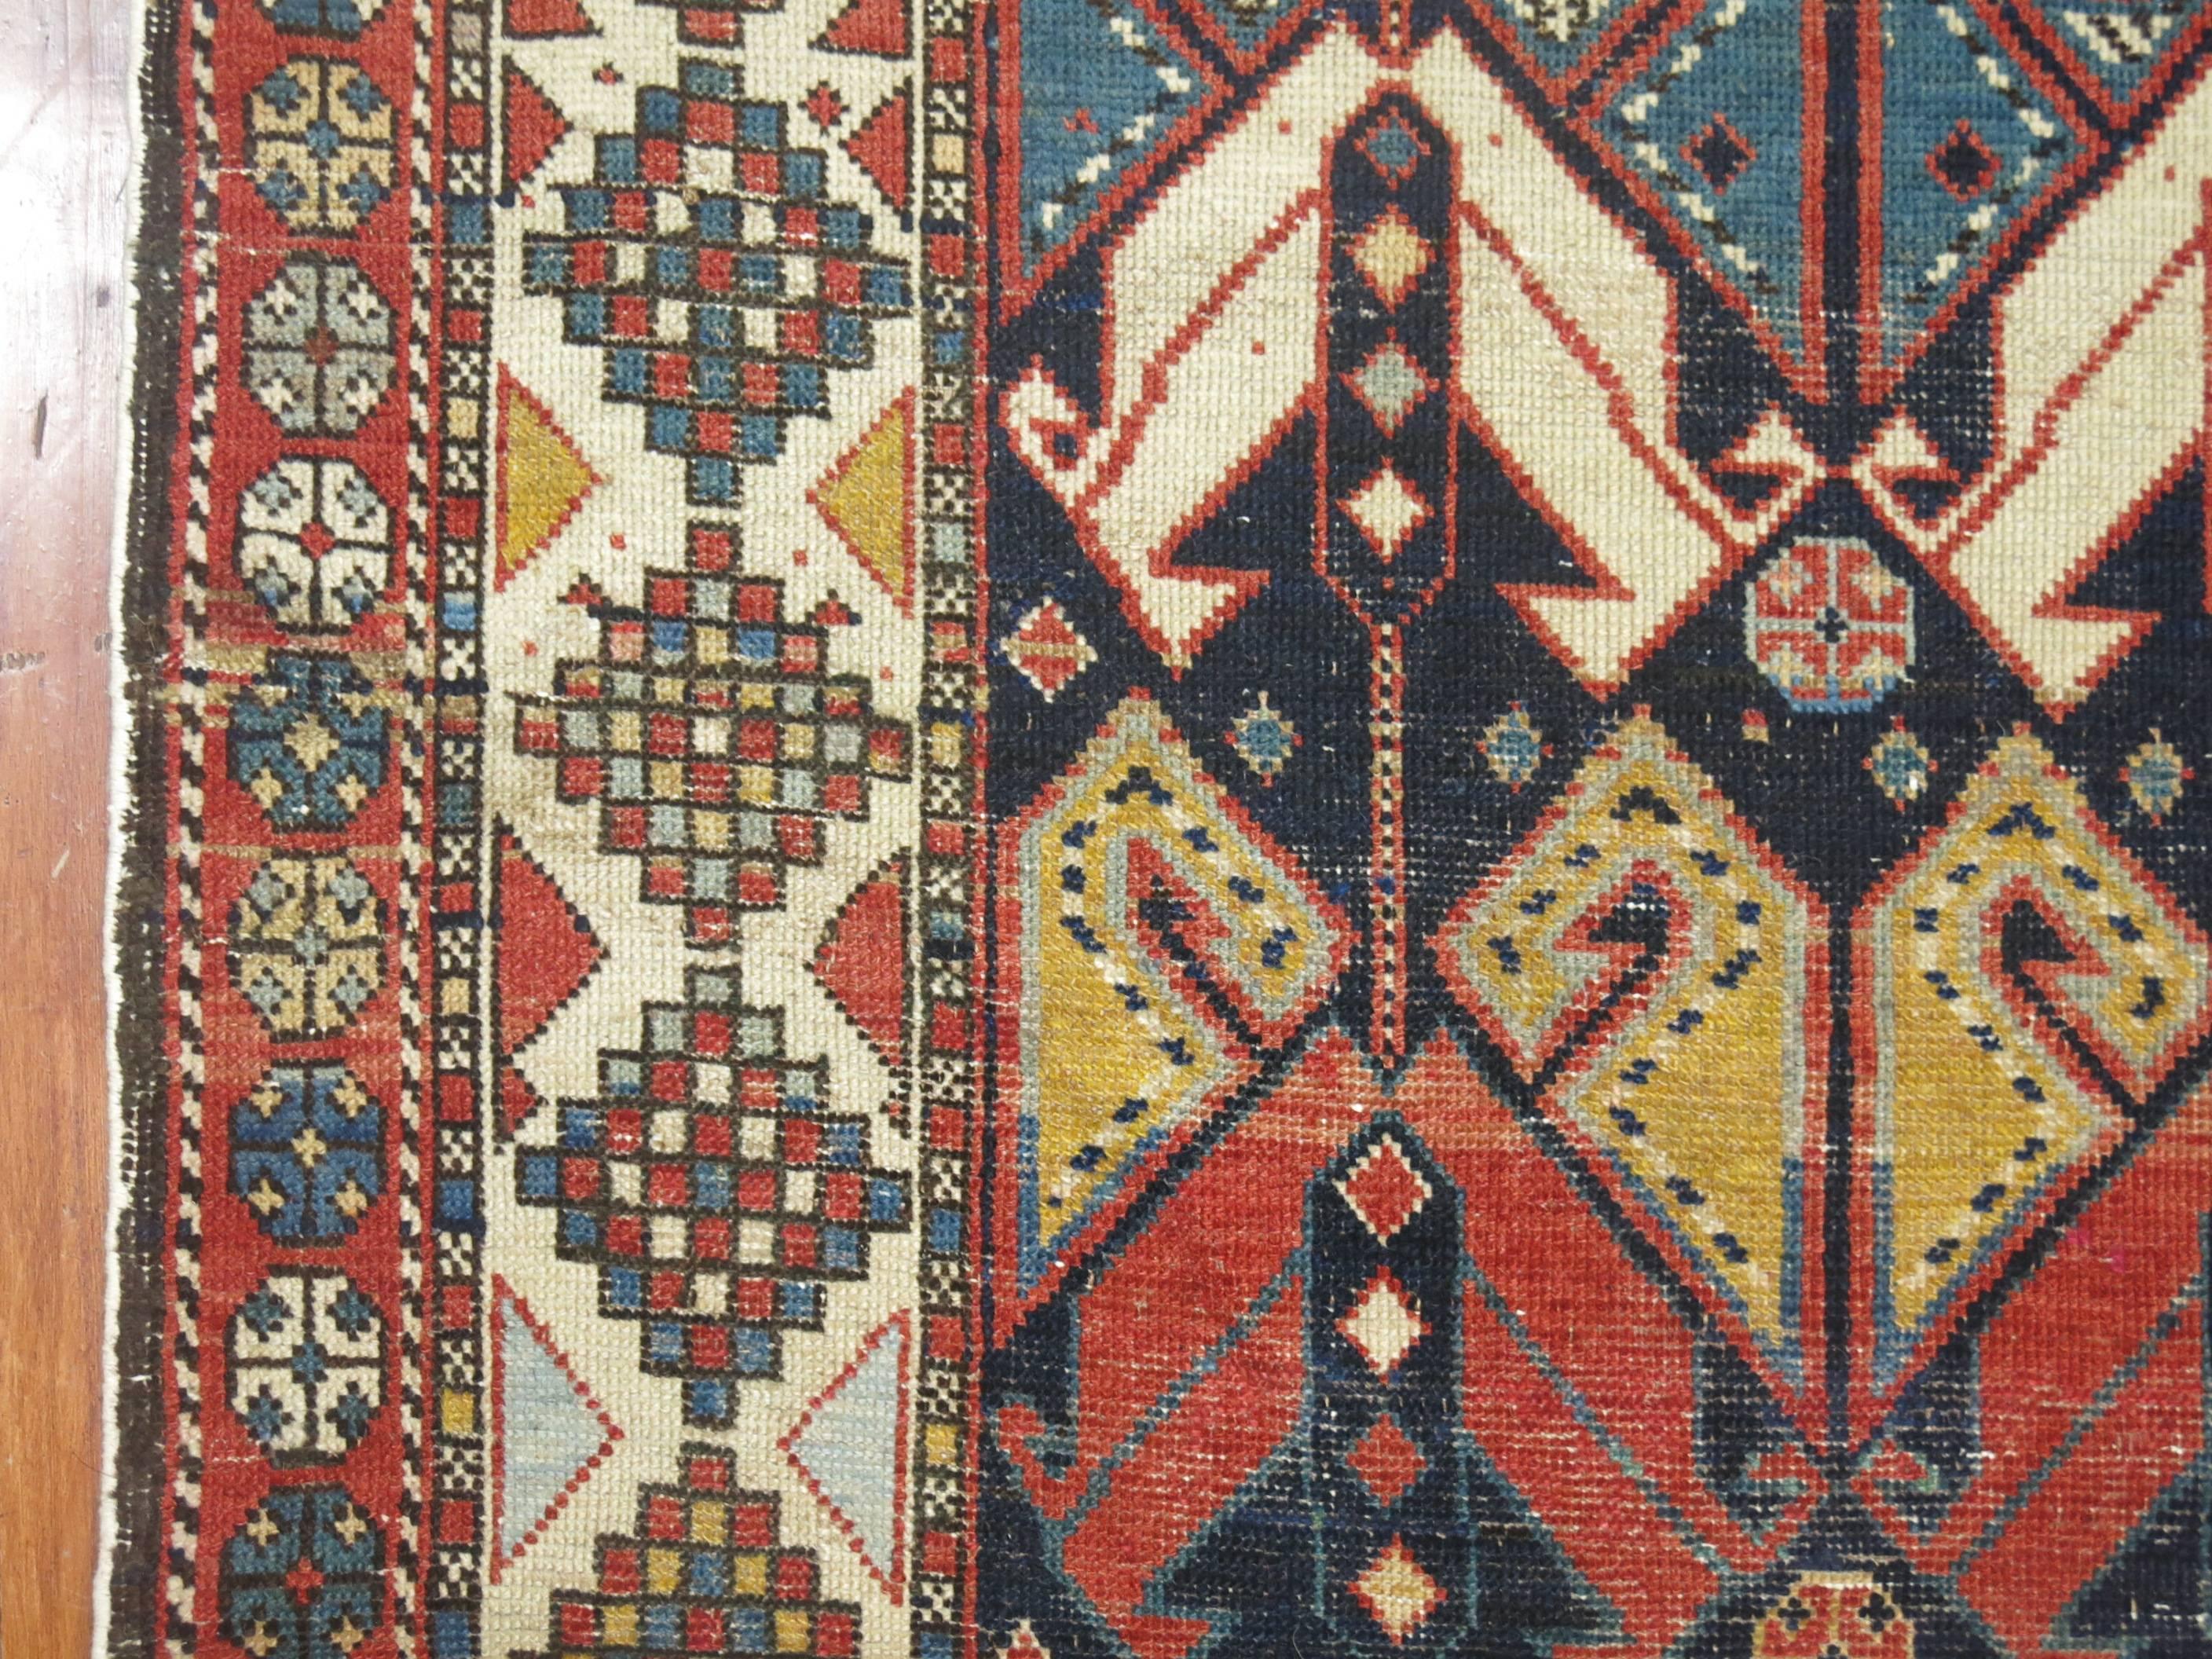 An authentic early 20th century one of a kind decorative style antique Caucasian Shirvan rug.